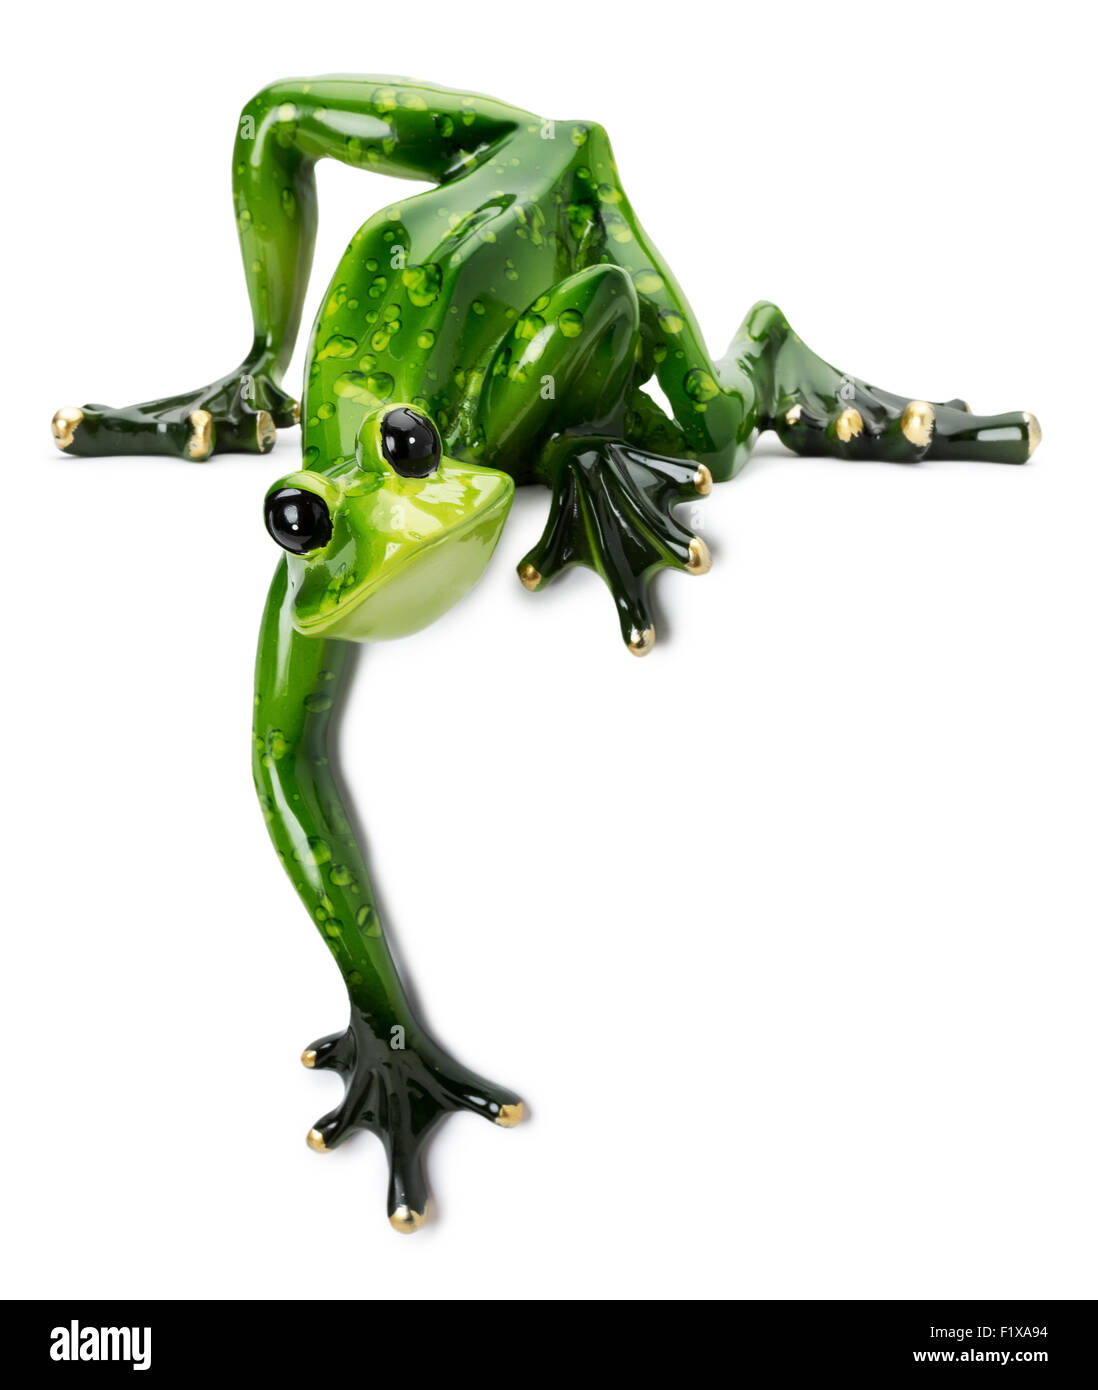 statue of green frog on the white background. Stock Photo